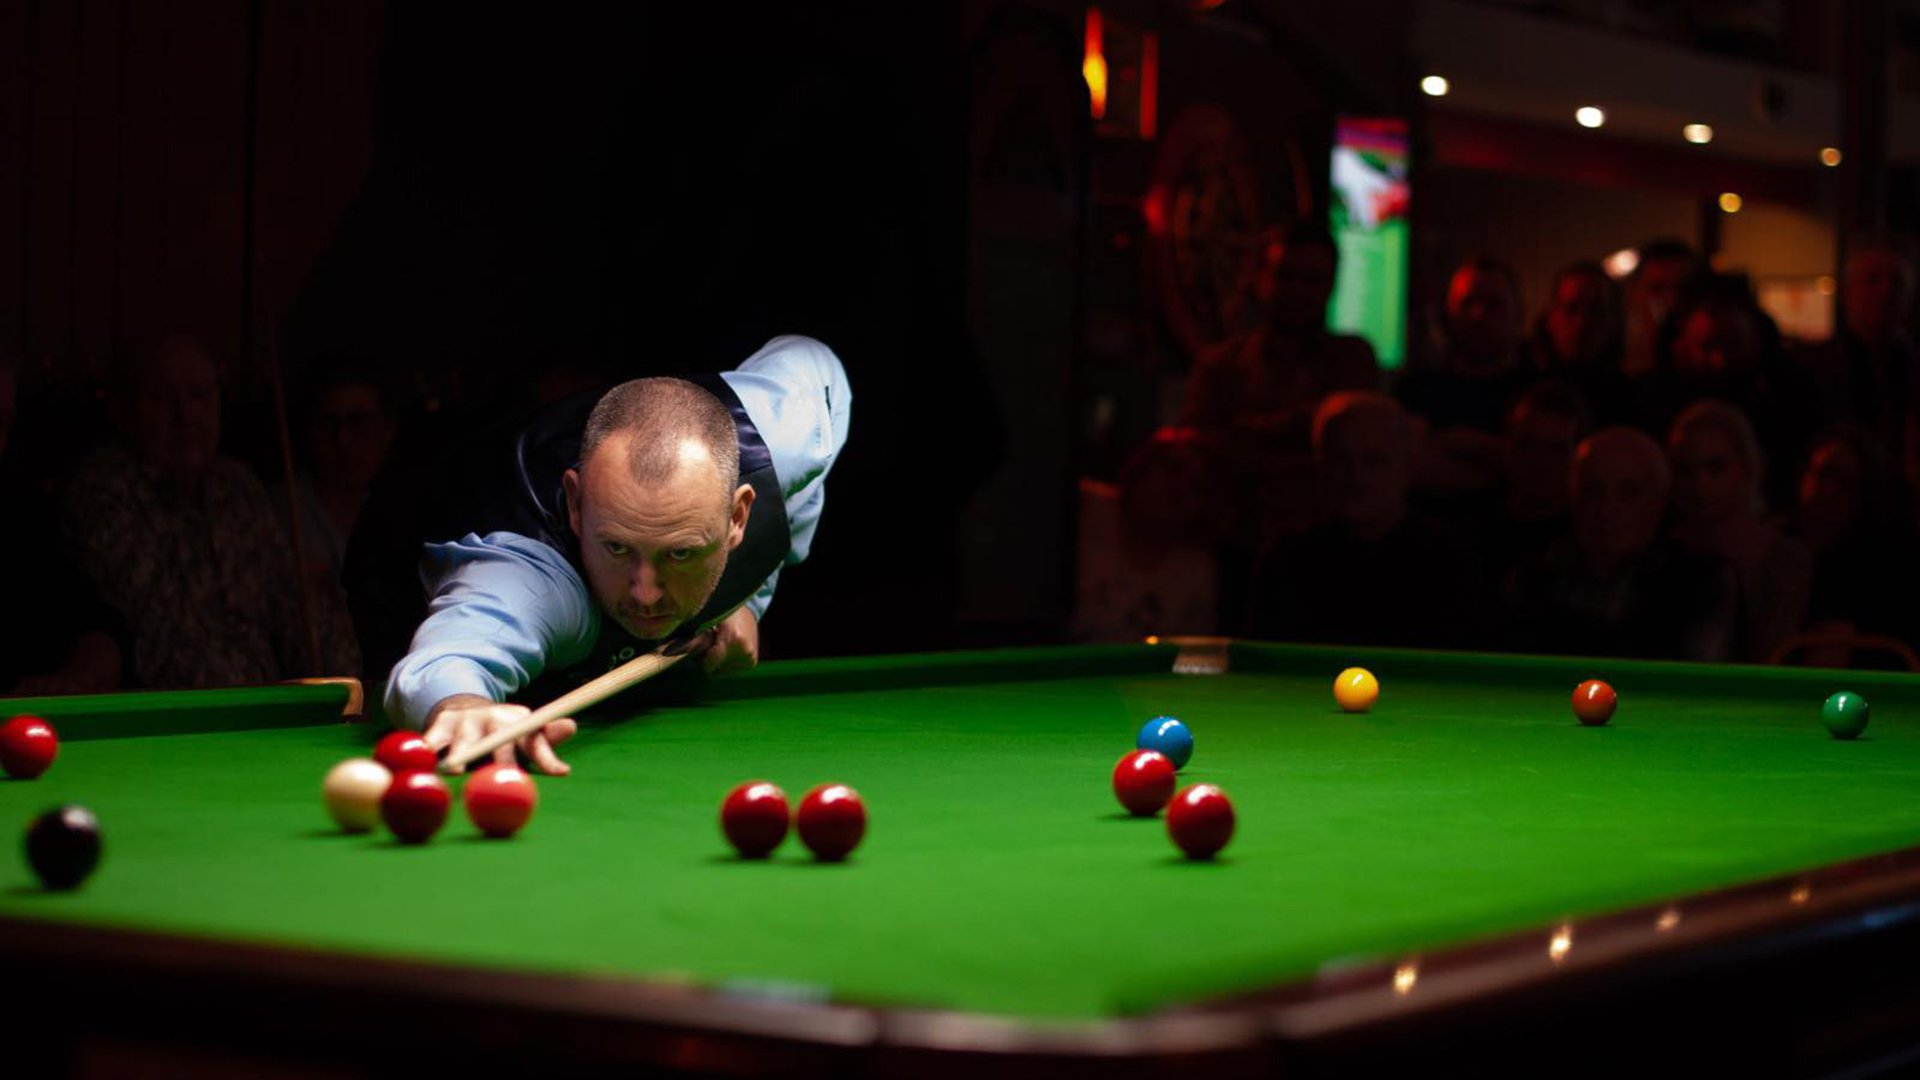 Three-time world champion comes to Lincoln Snooker Club